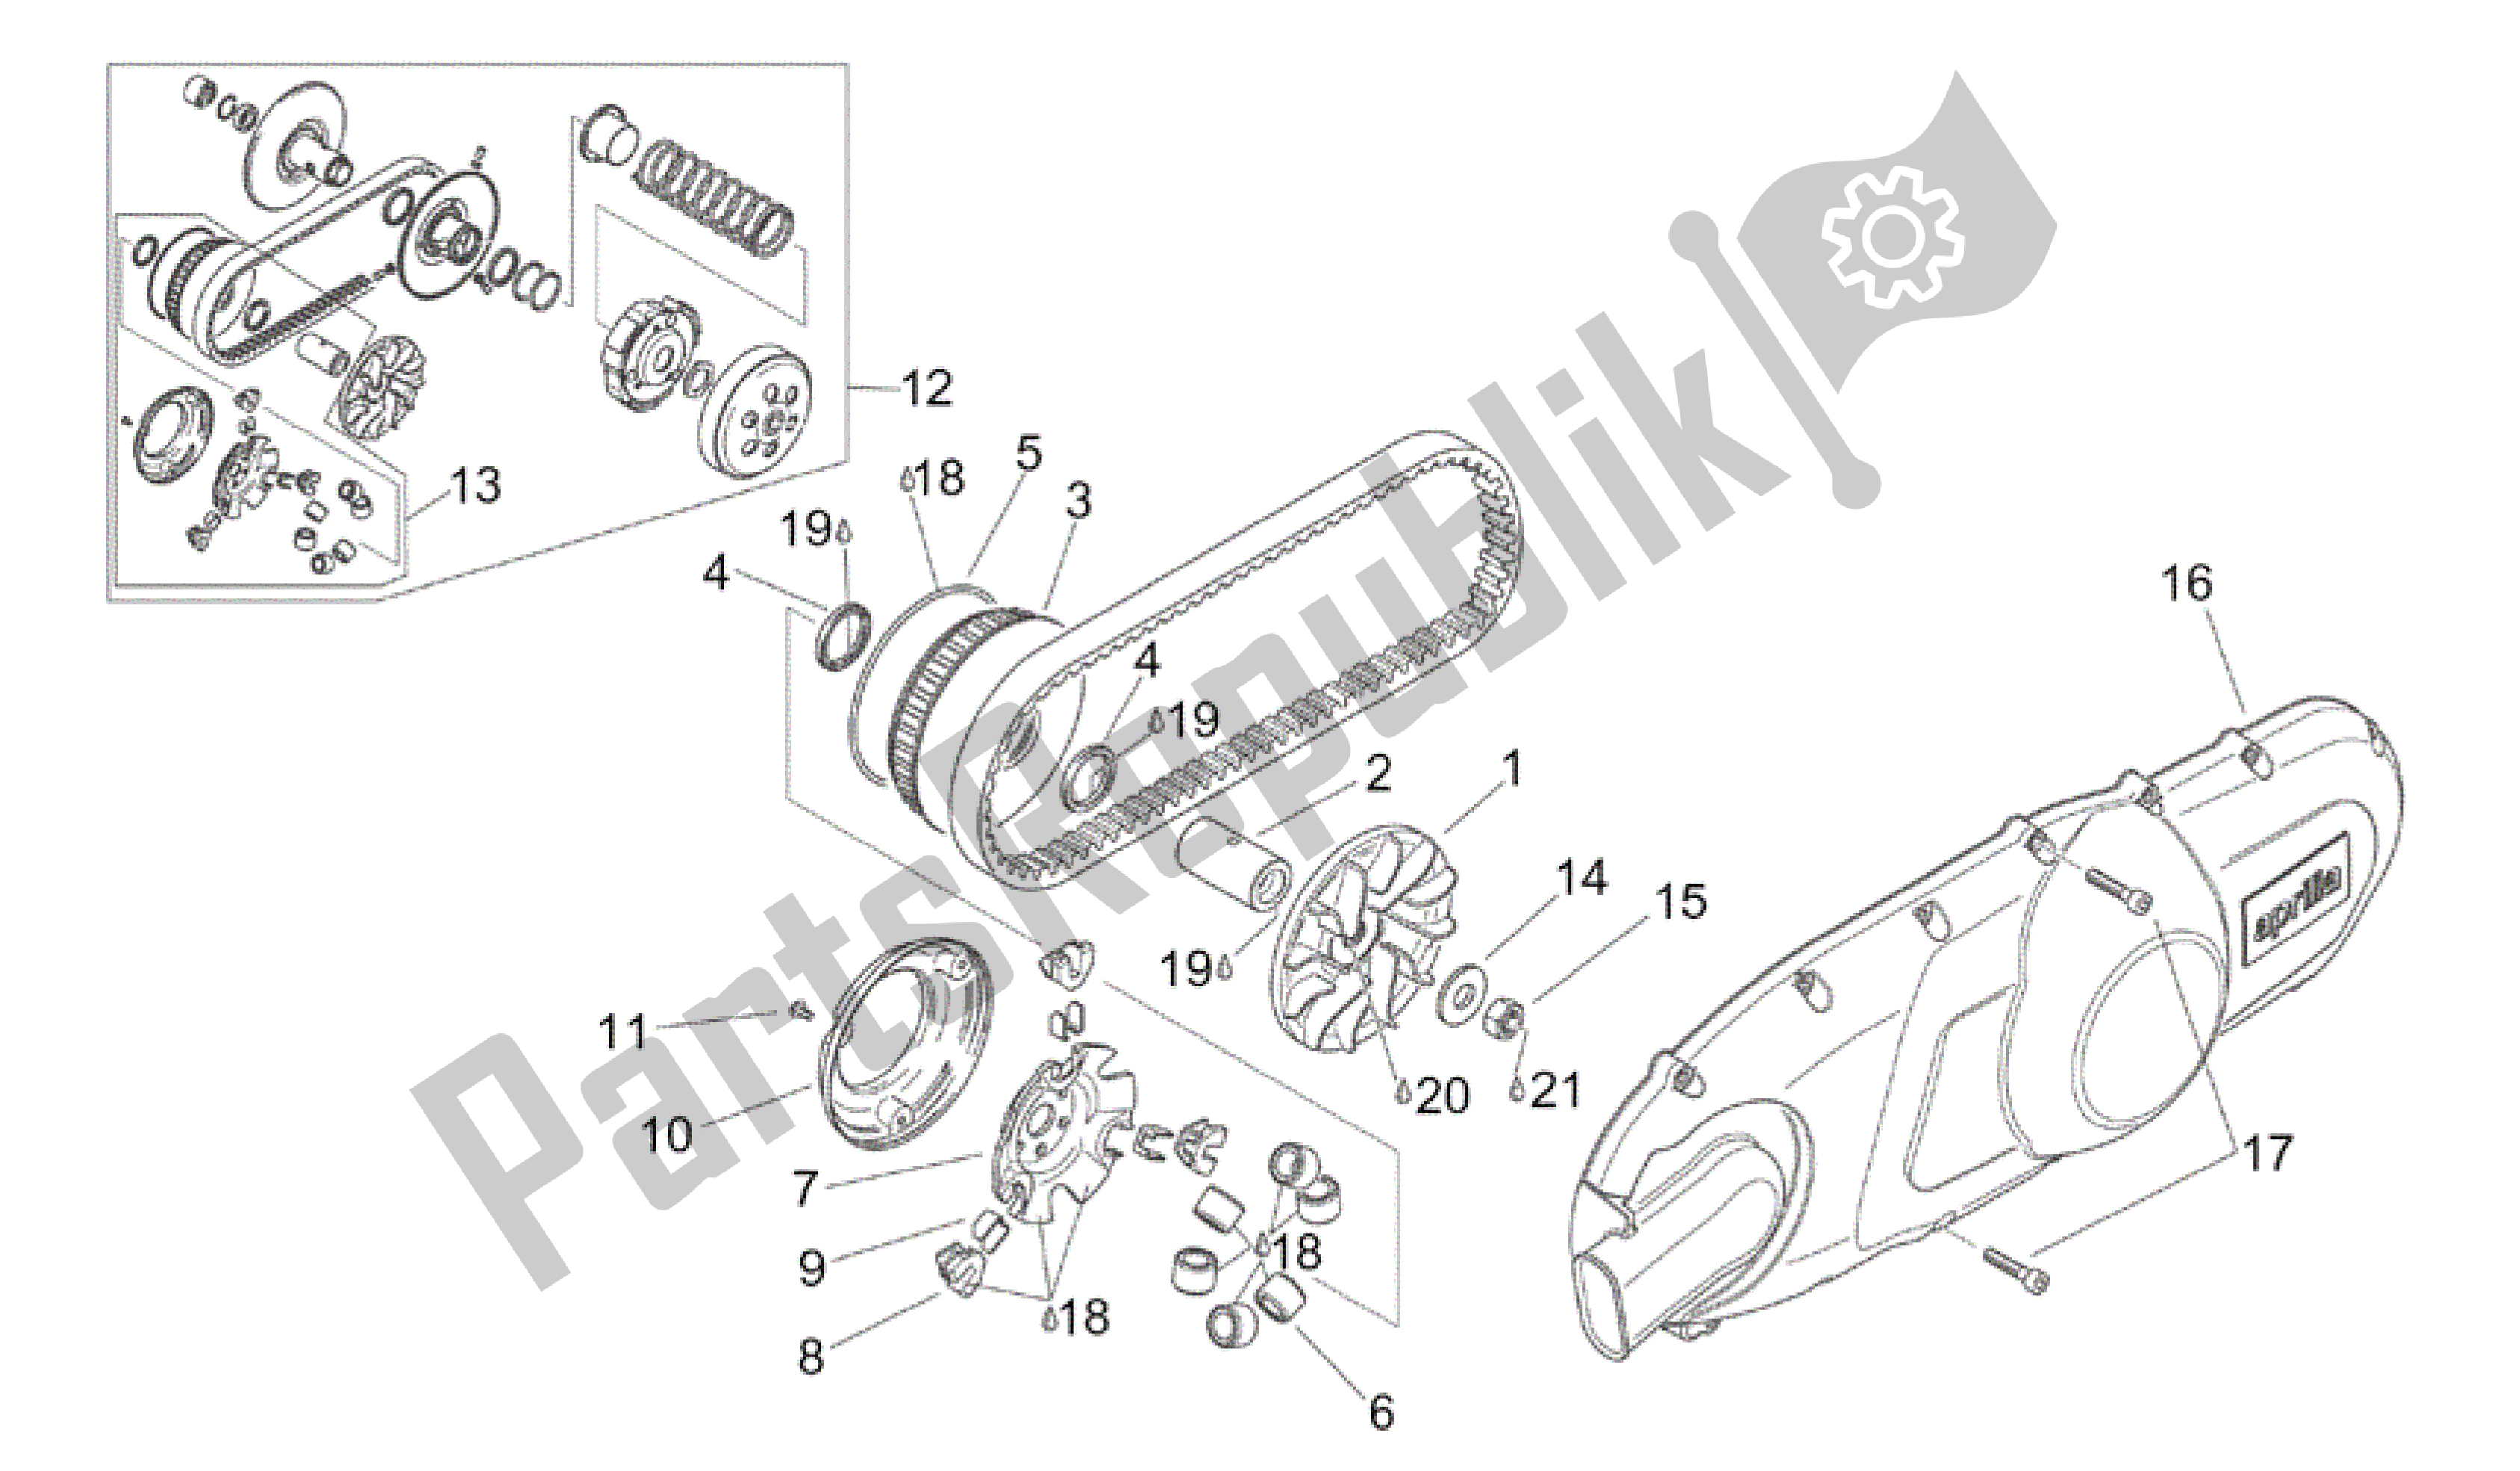 All parts for the Variator - Primary Drive of the Aprilia Scarabeo 150 1999 - 2004